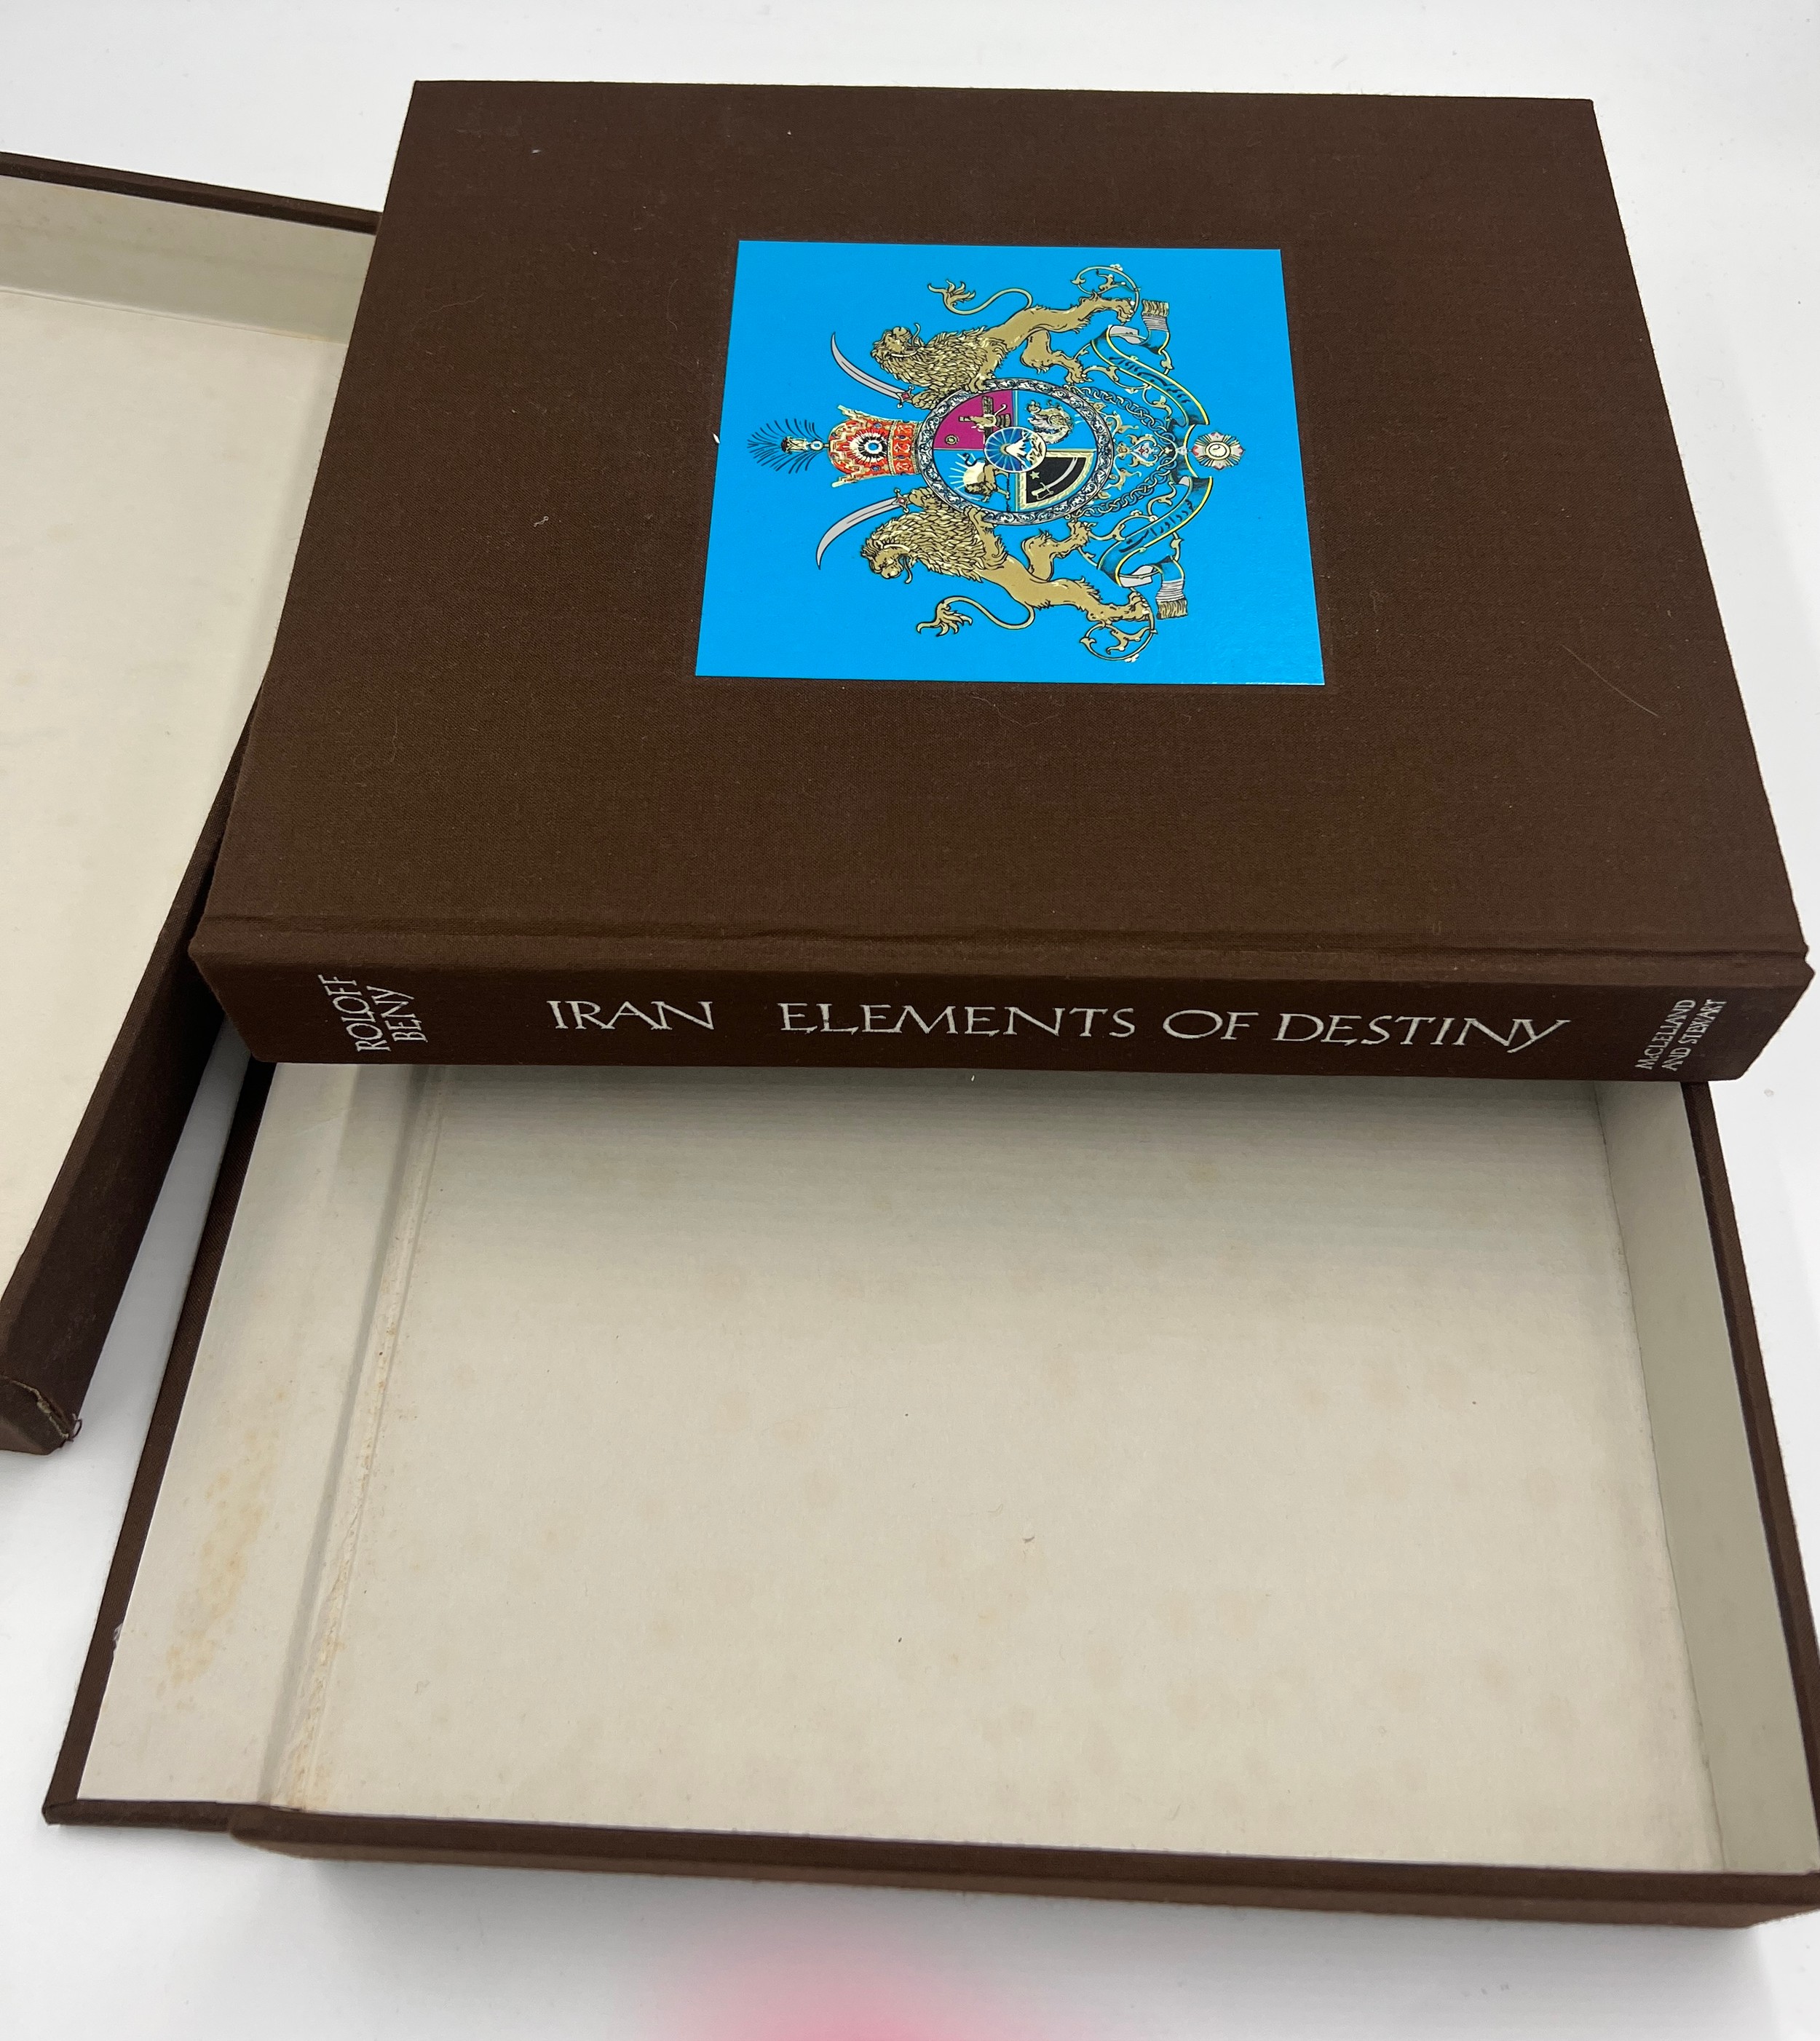 Roloff Beny, boxed book, Iran Elements of Destiny. - Image 2 of 4